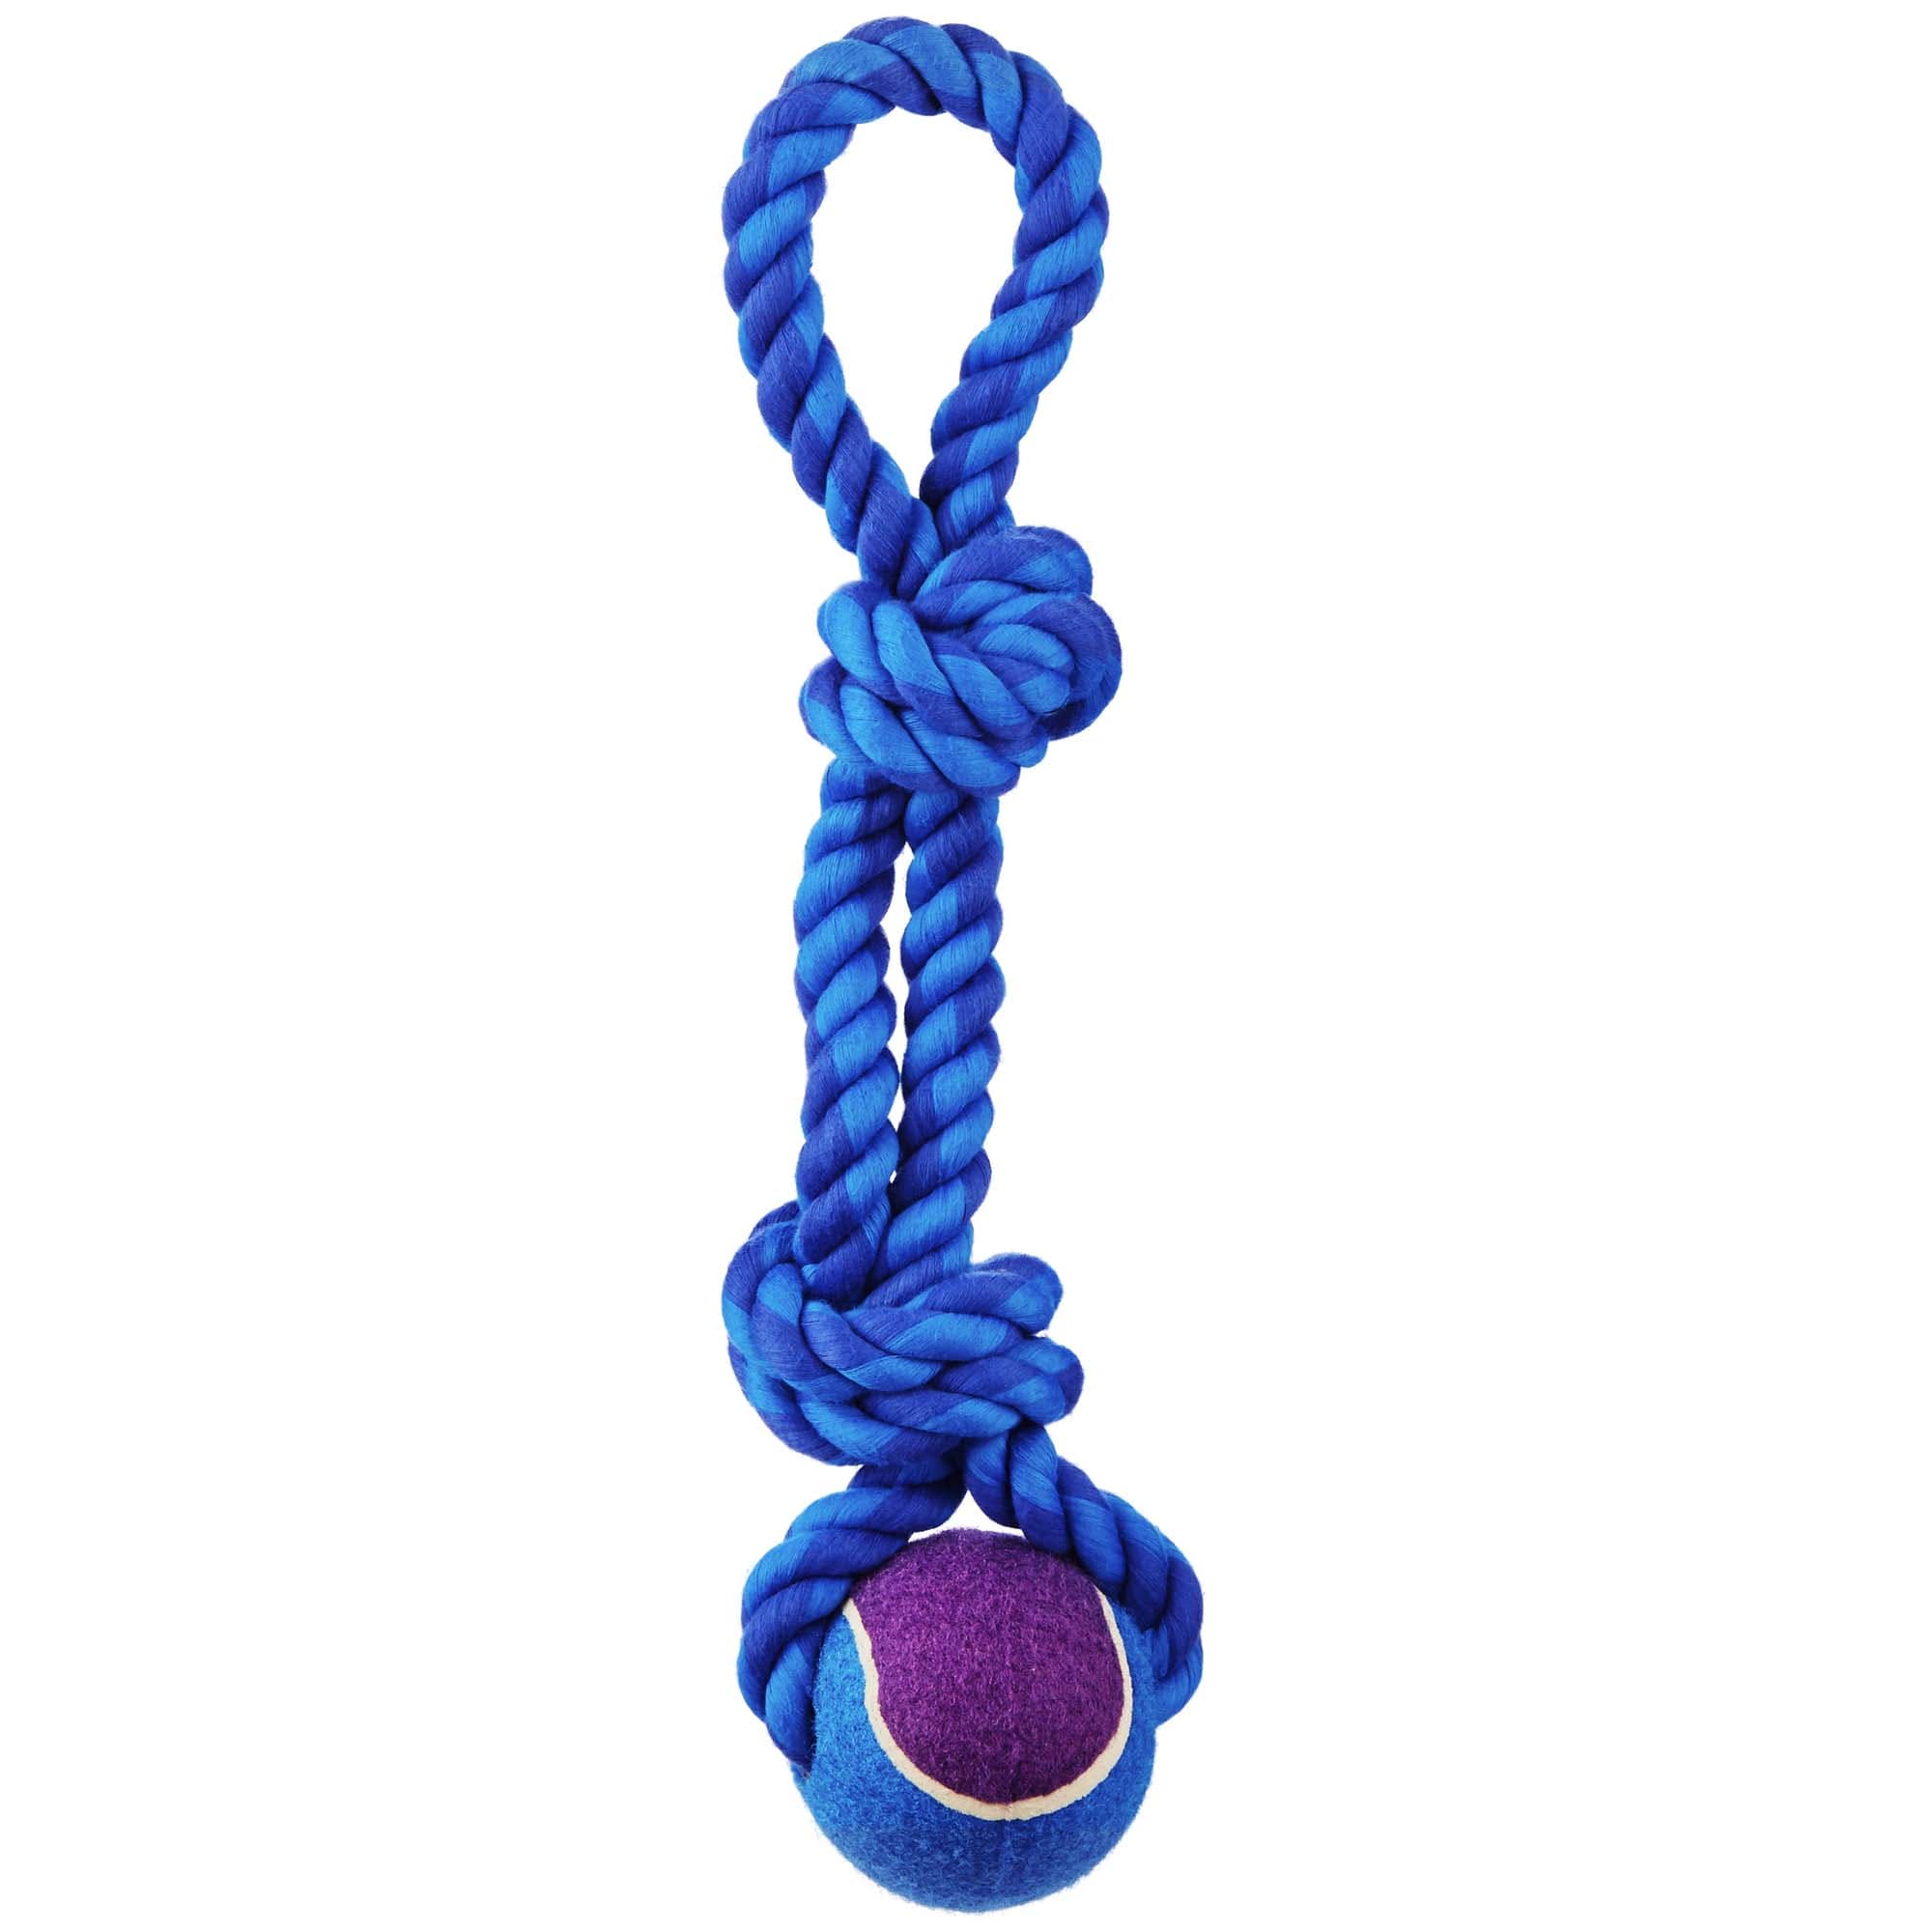 tennis ball on rope dog toy